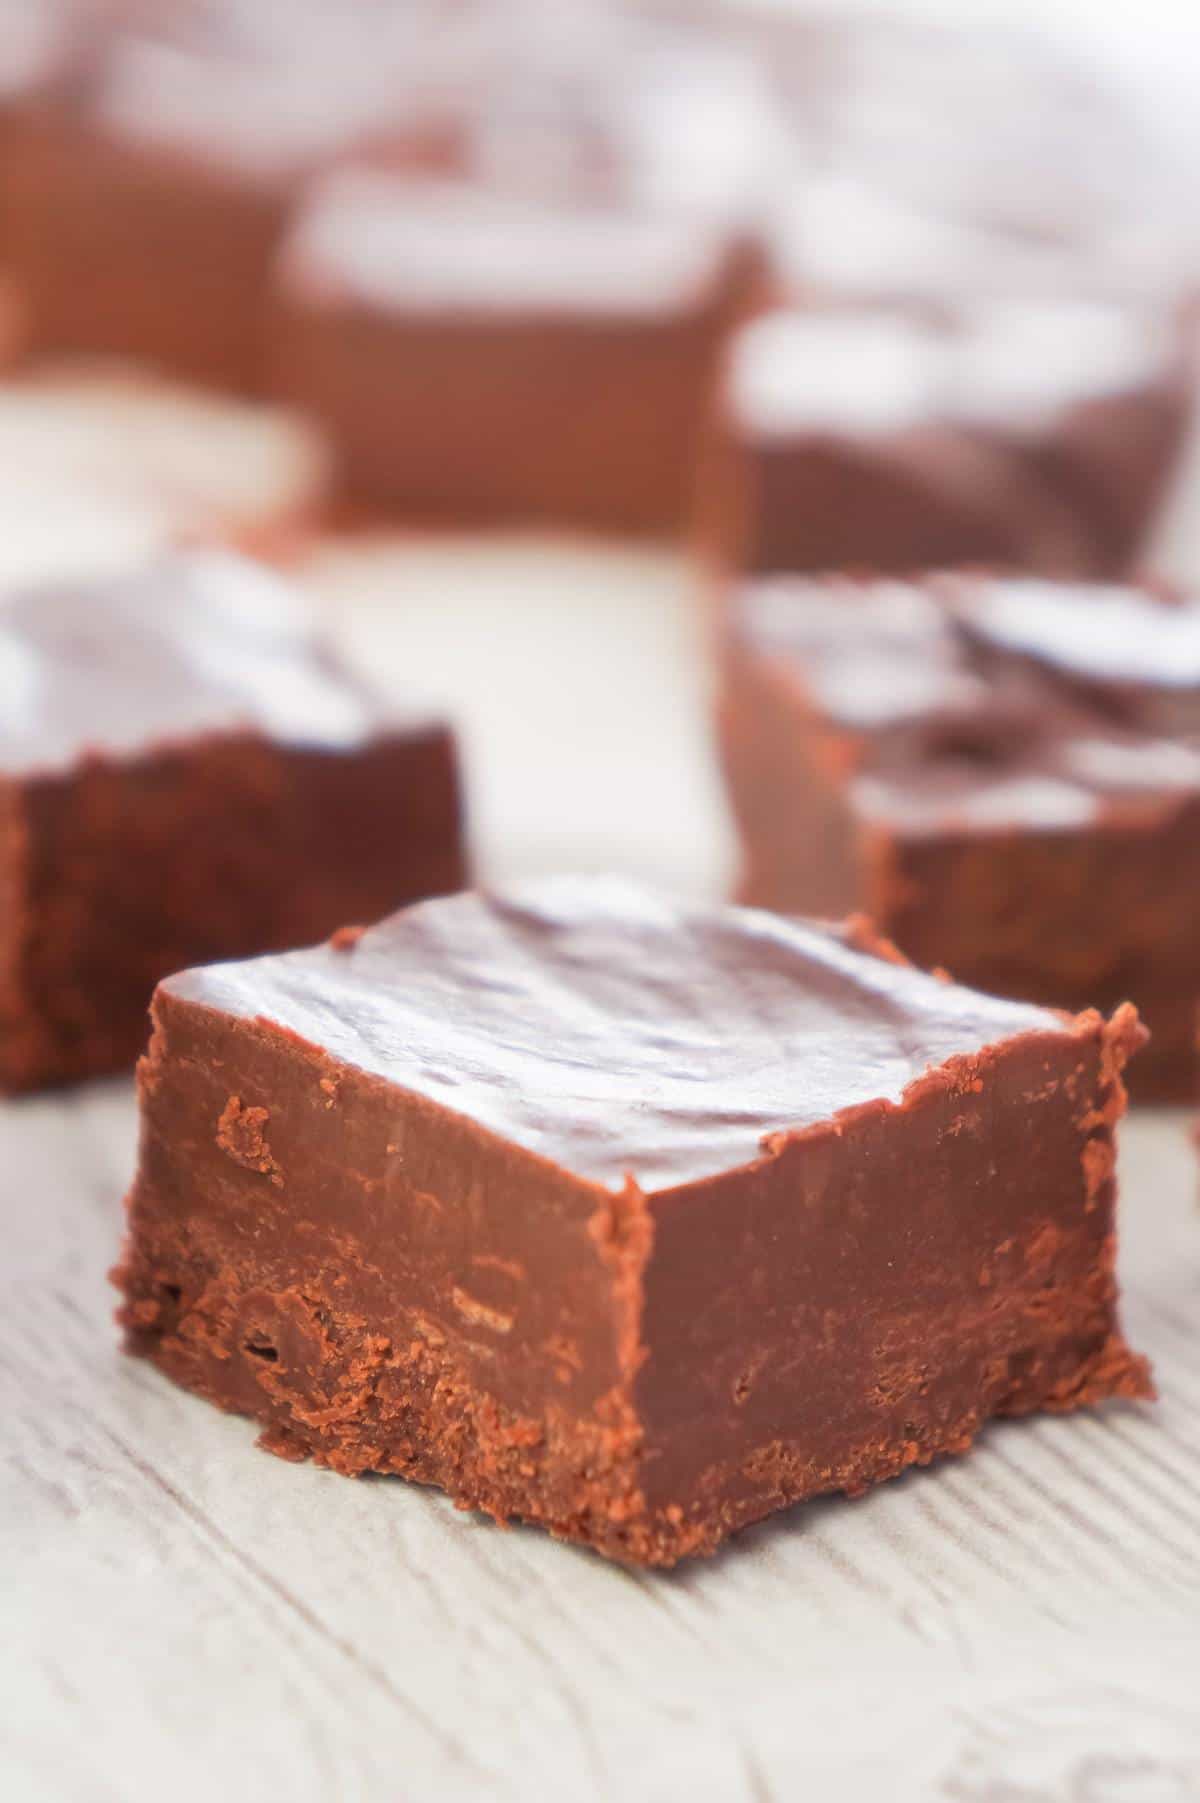 Easy Chocolate Fudge This Is Not Diet Food,How To Make Copyright Symbol On Keyboard